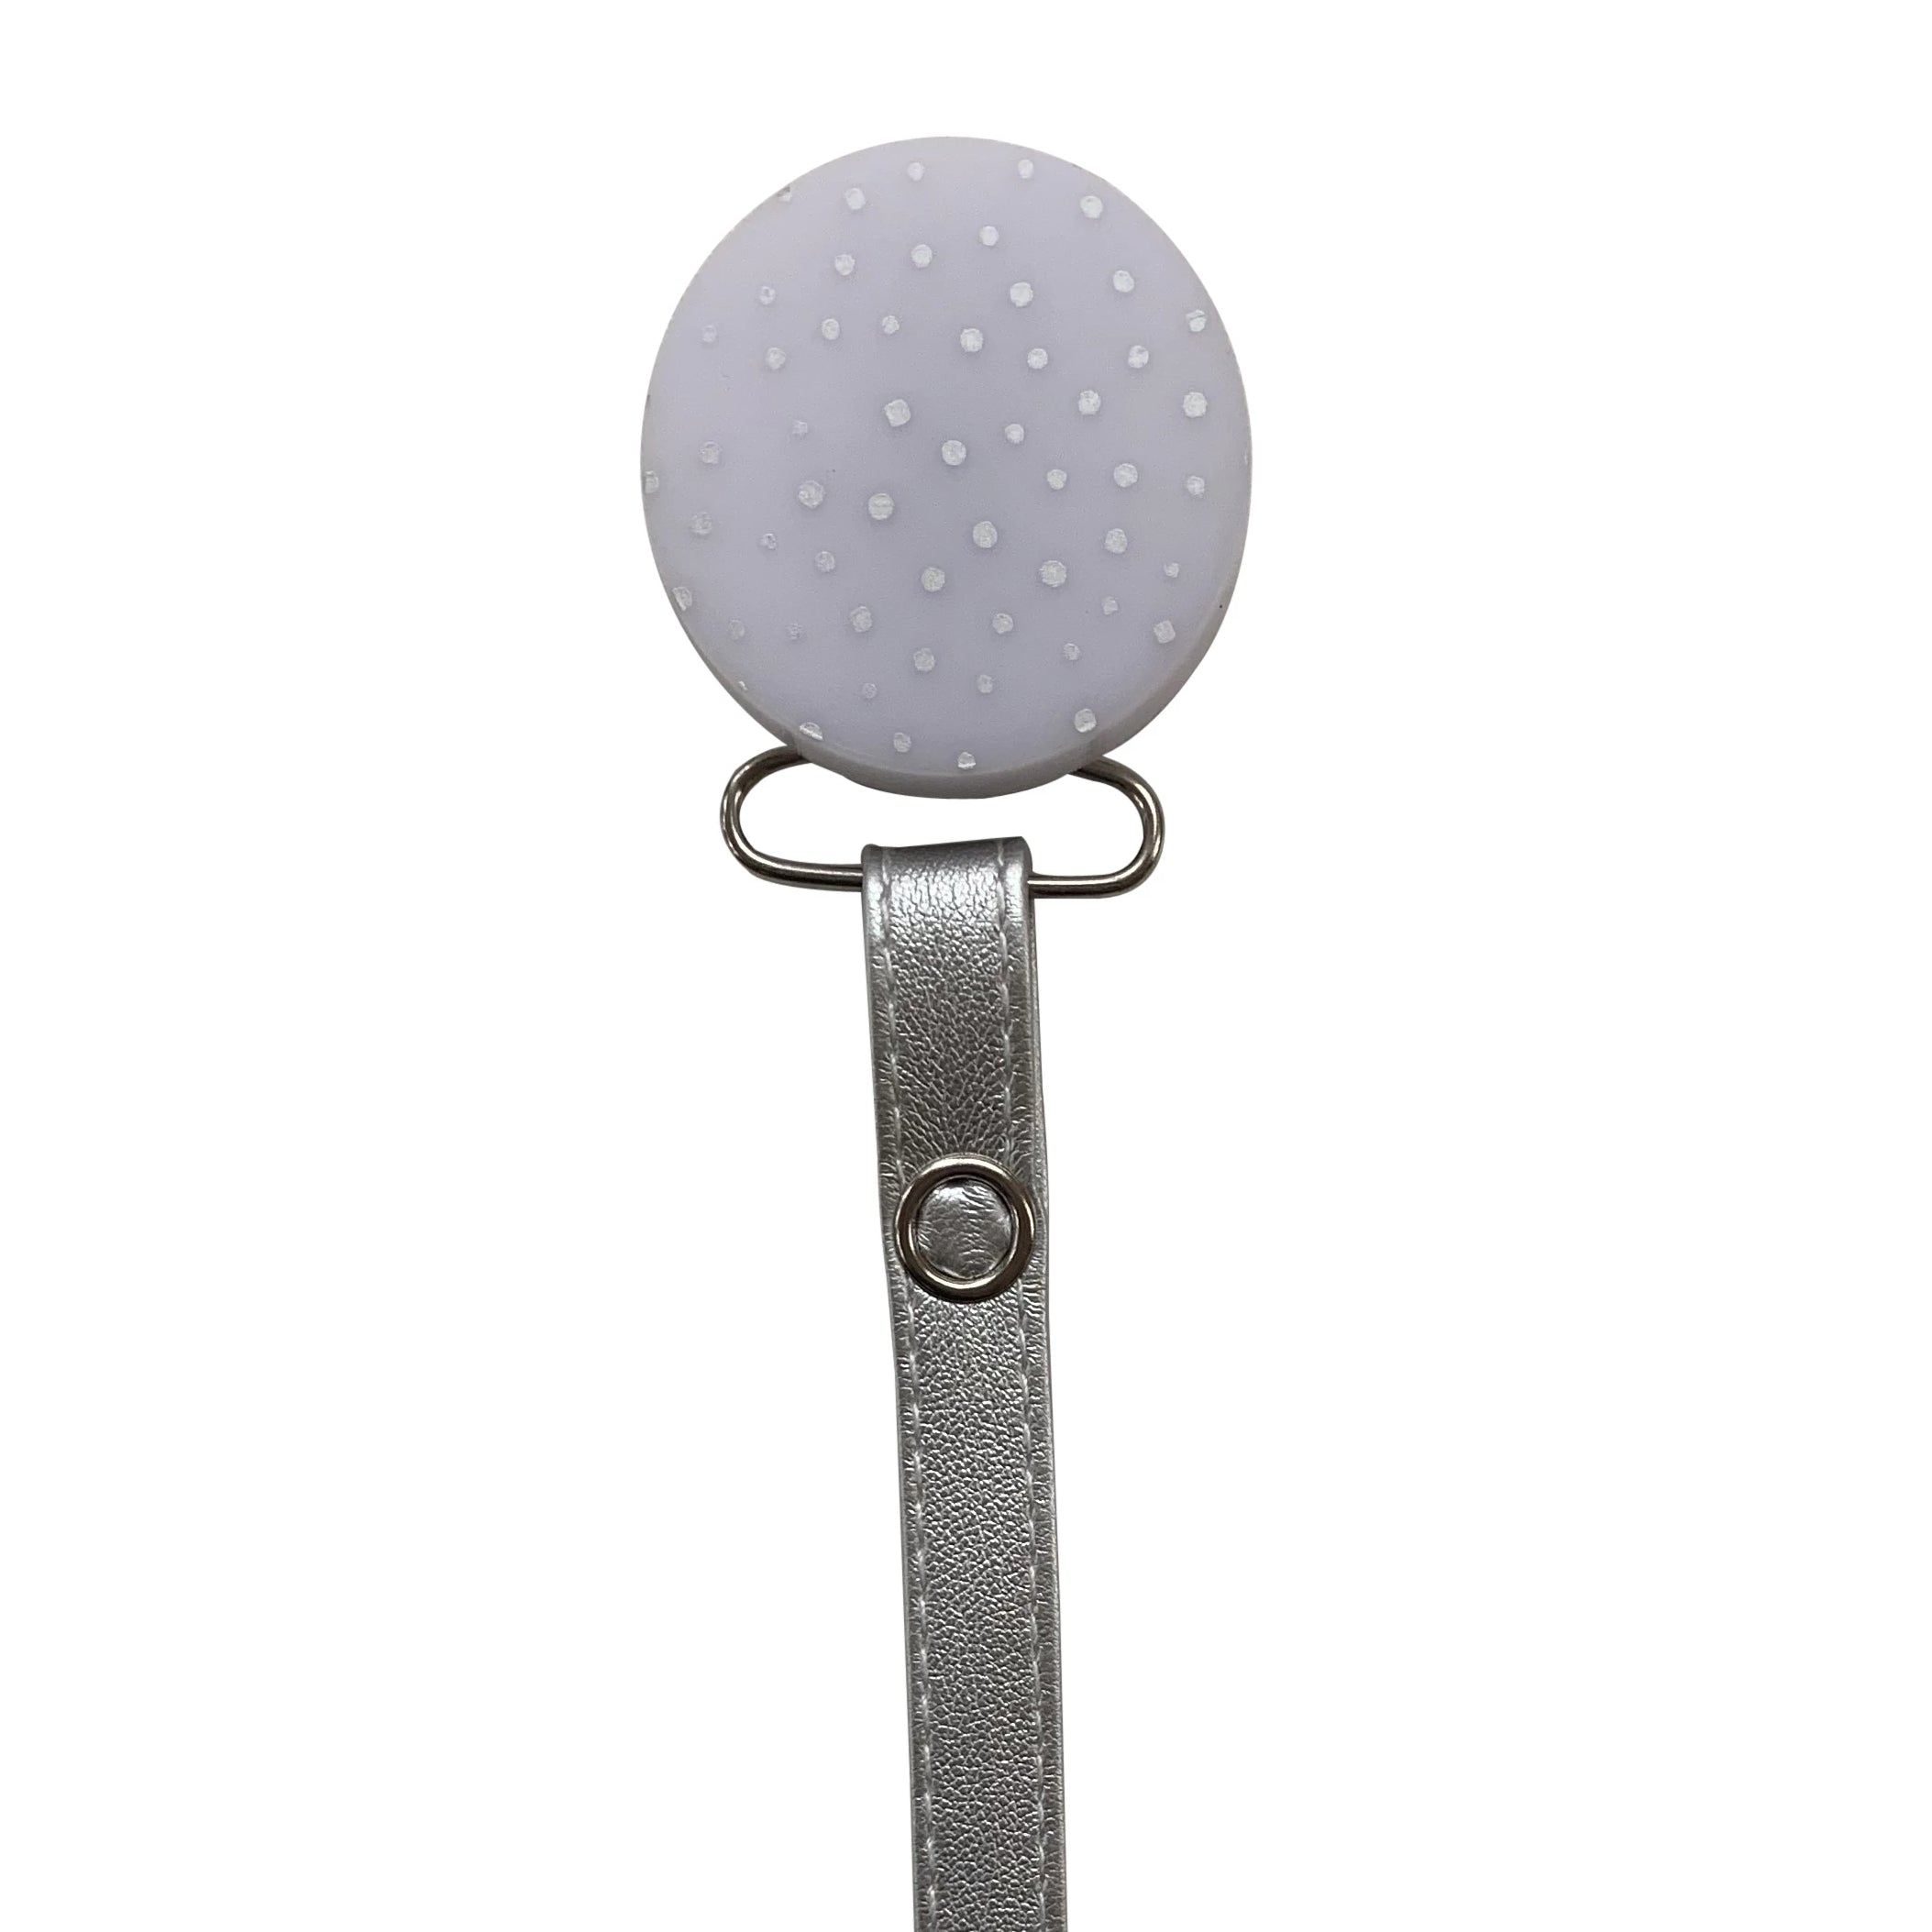 Classy Paci CHIC Grey Silver Polka Dot Round clip with Bibs pacifier GIFT SET